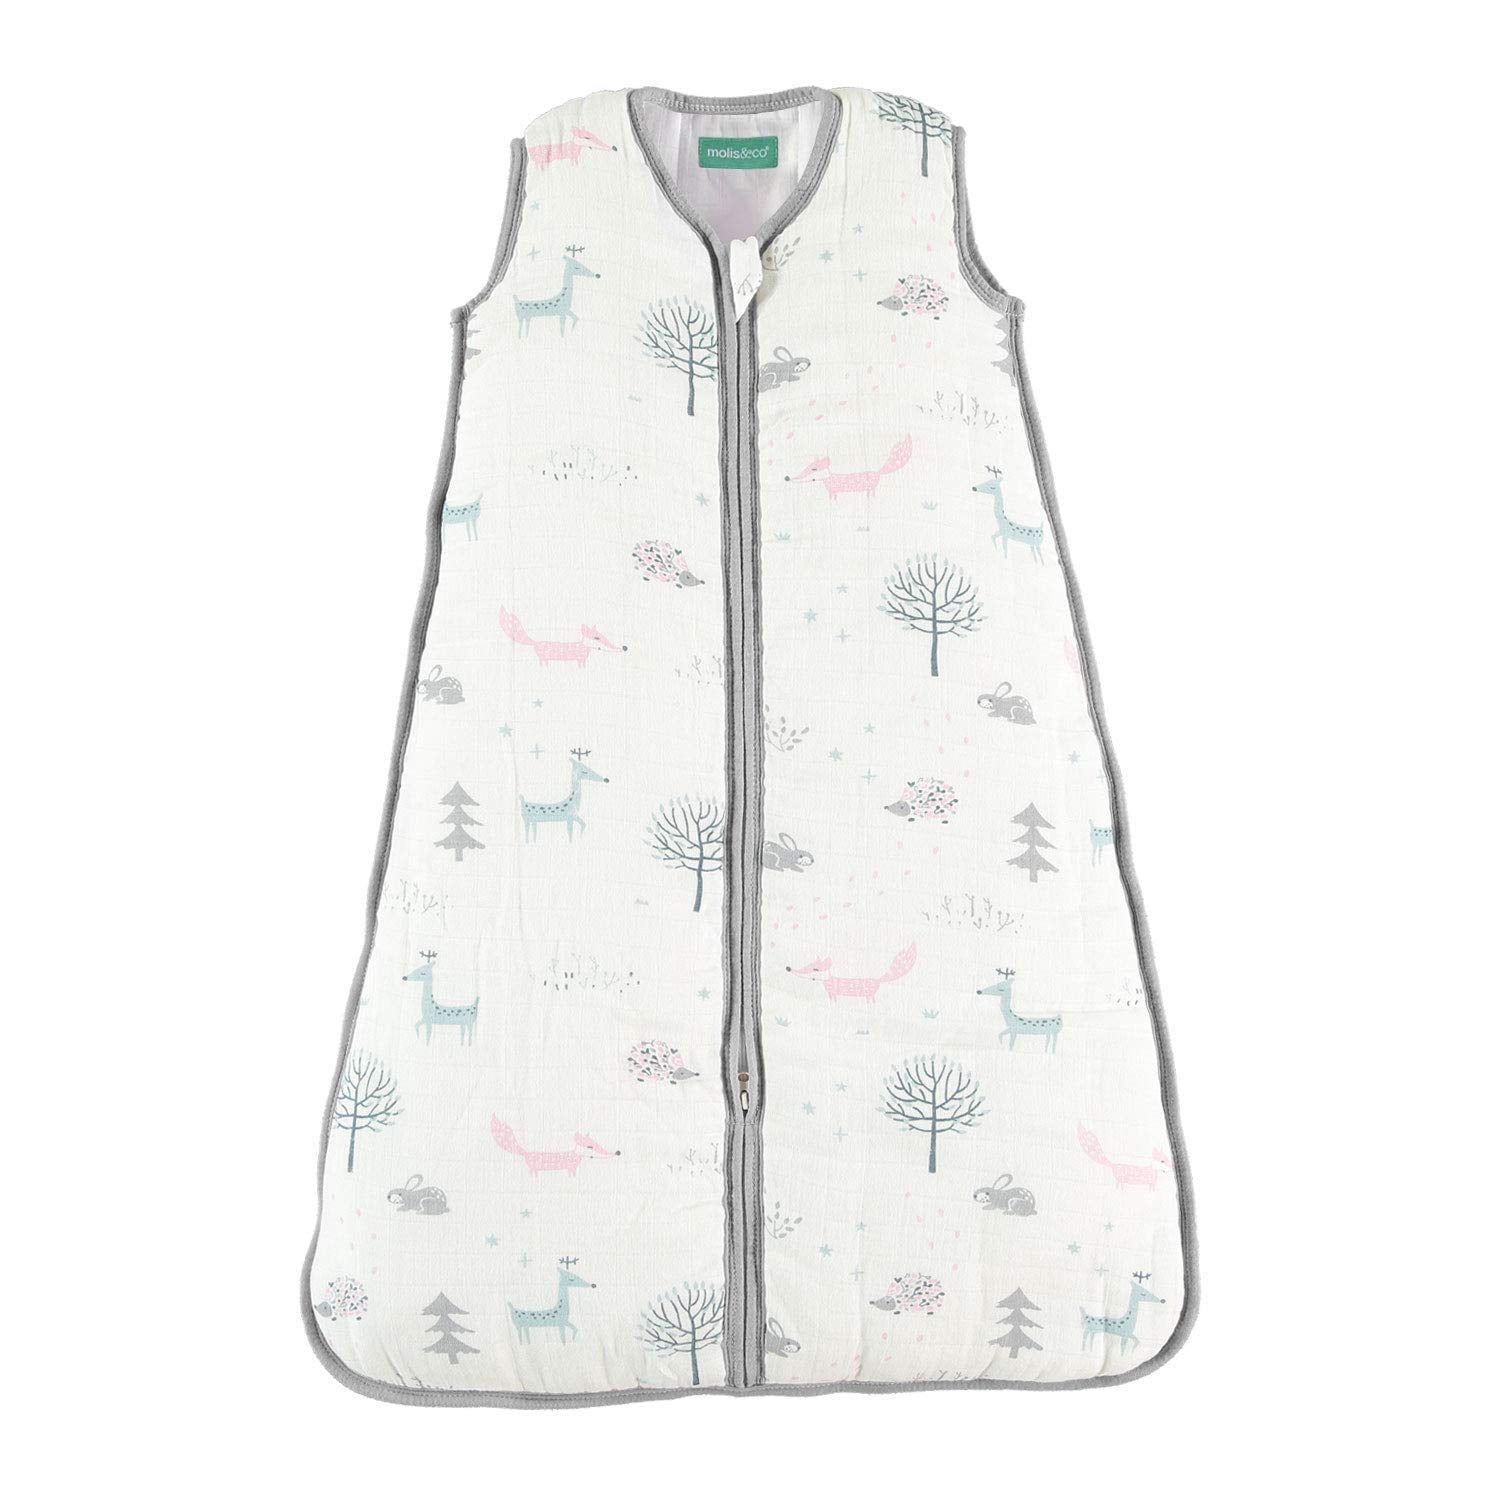 Molis & co Sleeping Bag Baby, 2.5 TOG，Thick，Super Soft and Warm Muslin  Wearable Blanket for Unisex 12-18 Months. 33.1. Ideal for Winter, Forest  Pattern 